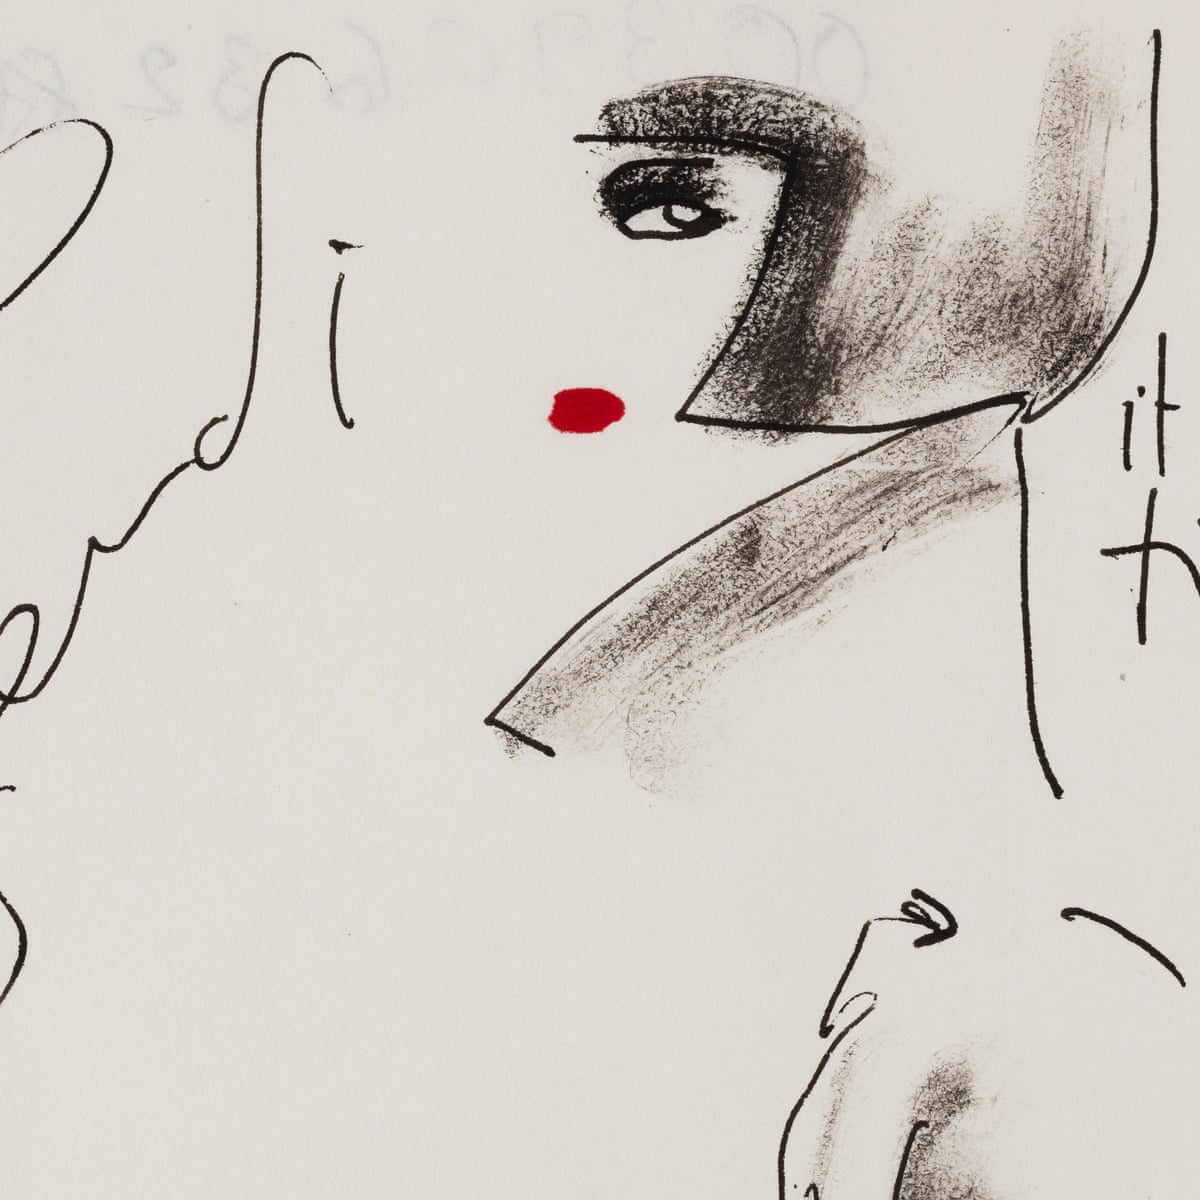 Karl Lagerfeld drawings sold for almost three times auction